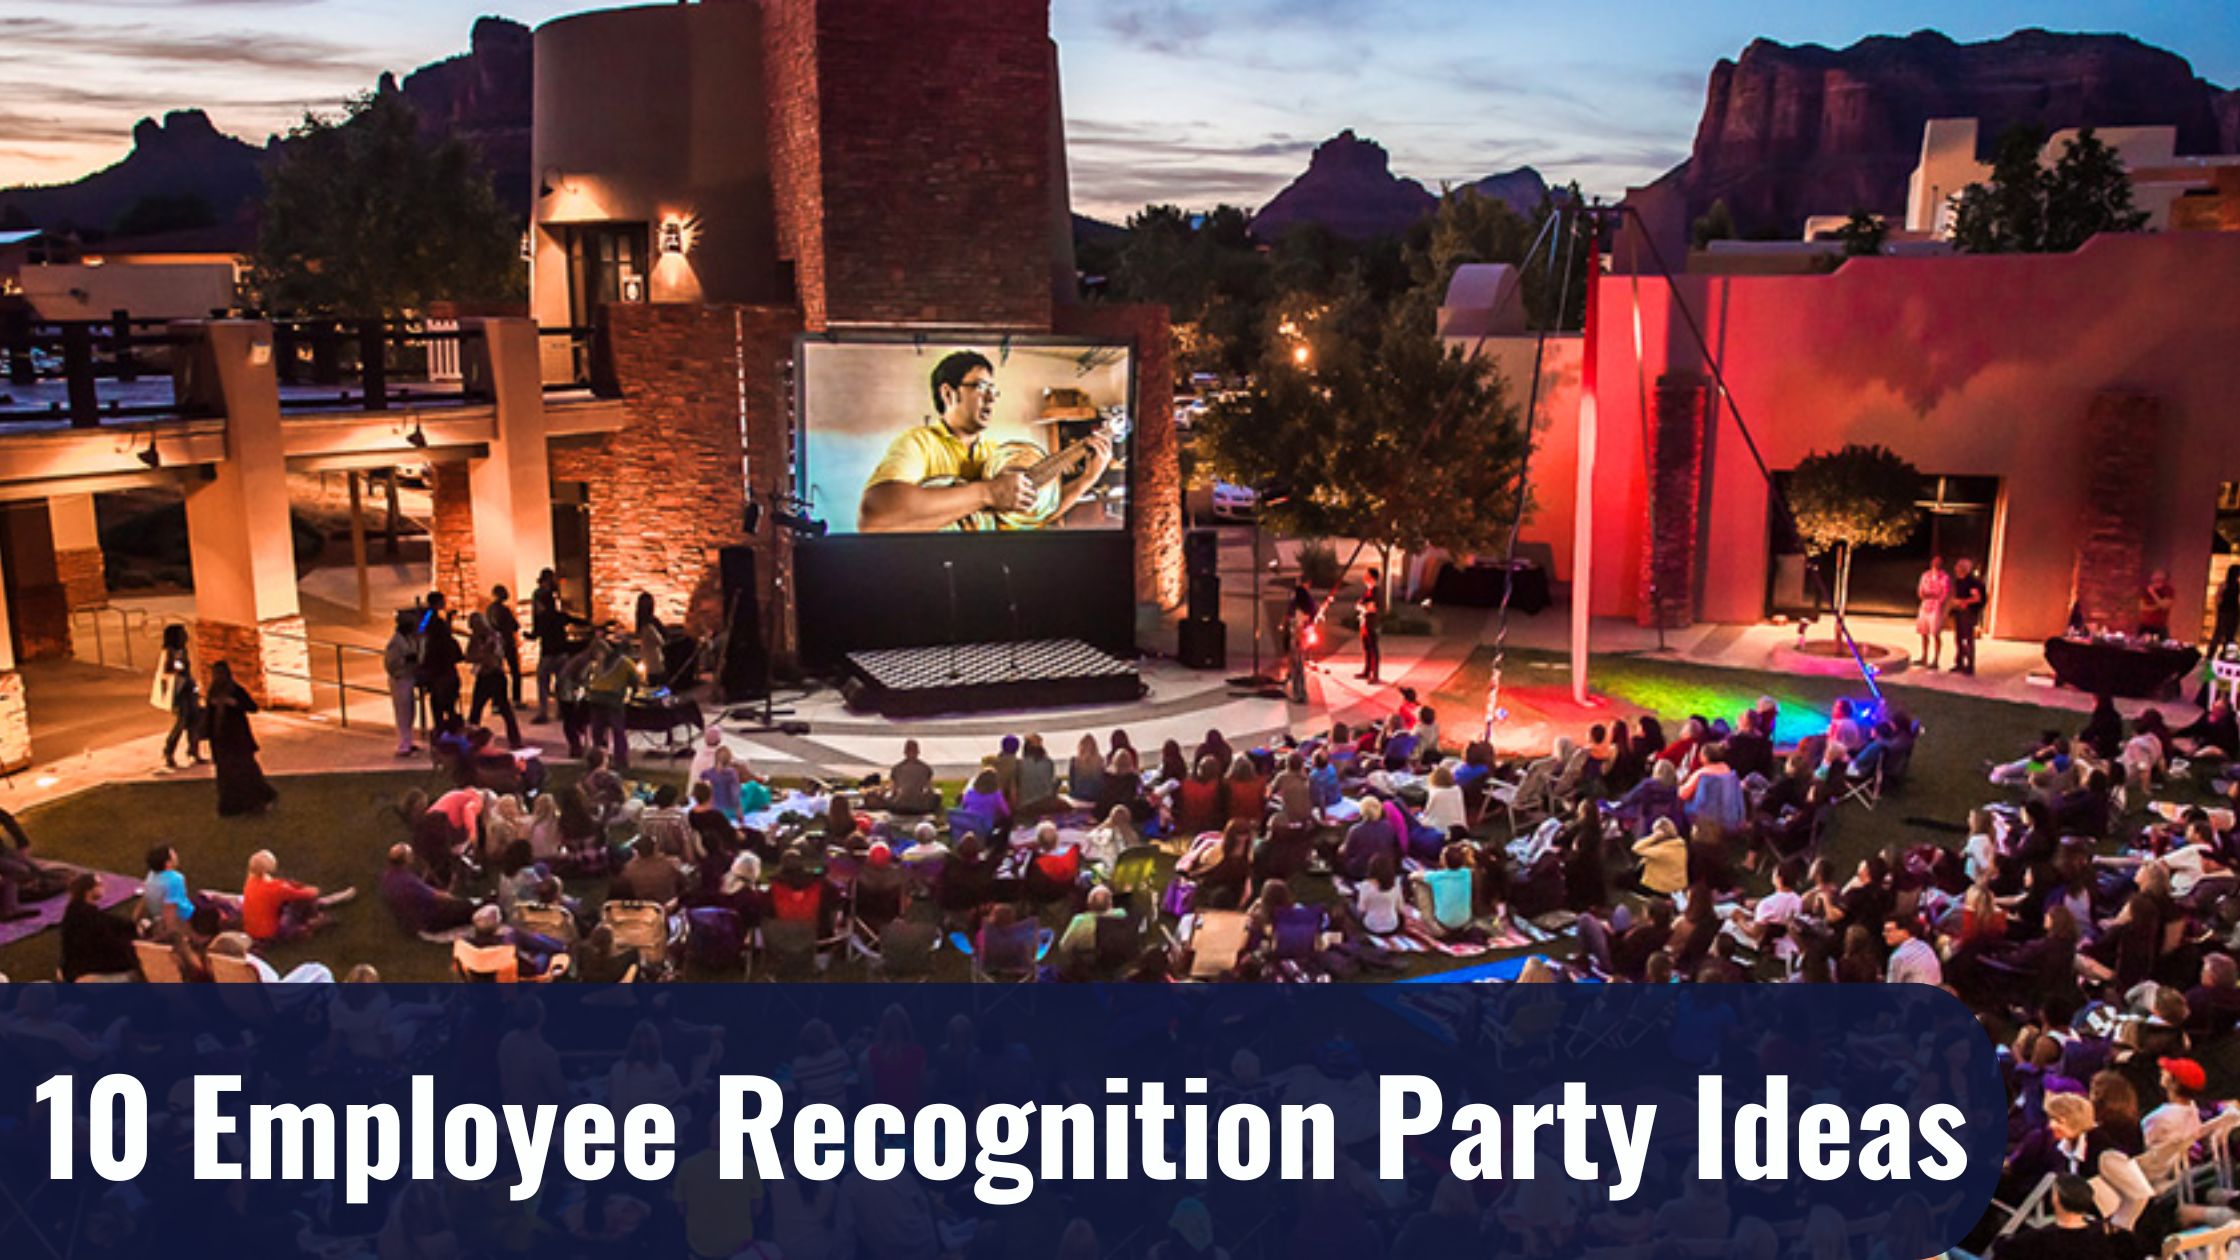 Fun Movies Galore: 10 Employee Recognition Party Ideas